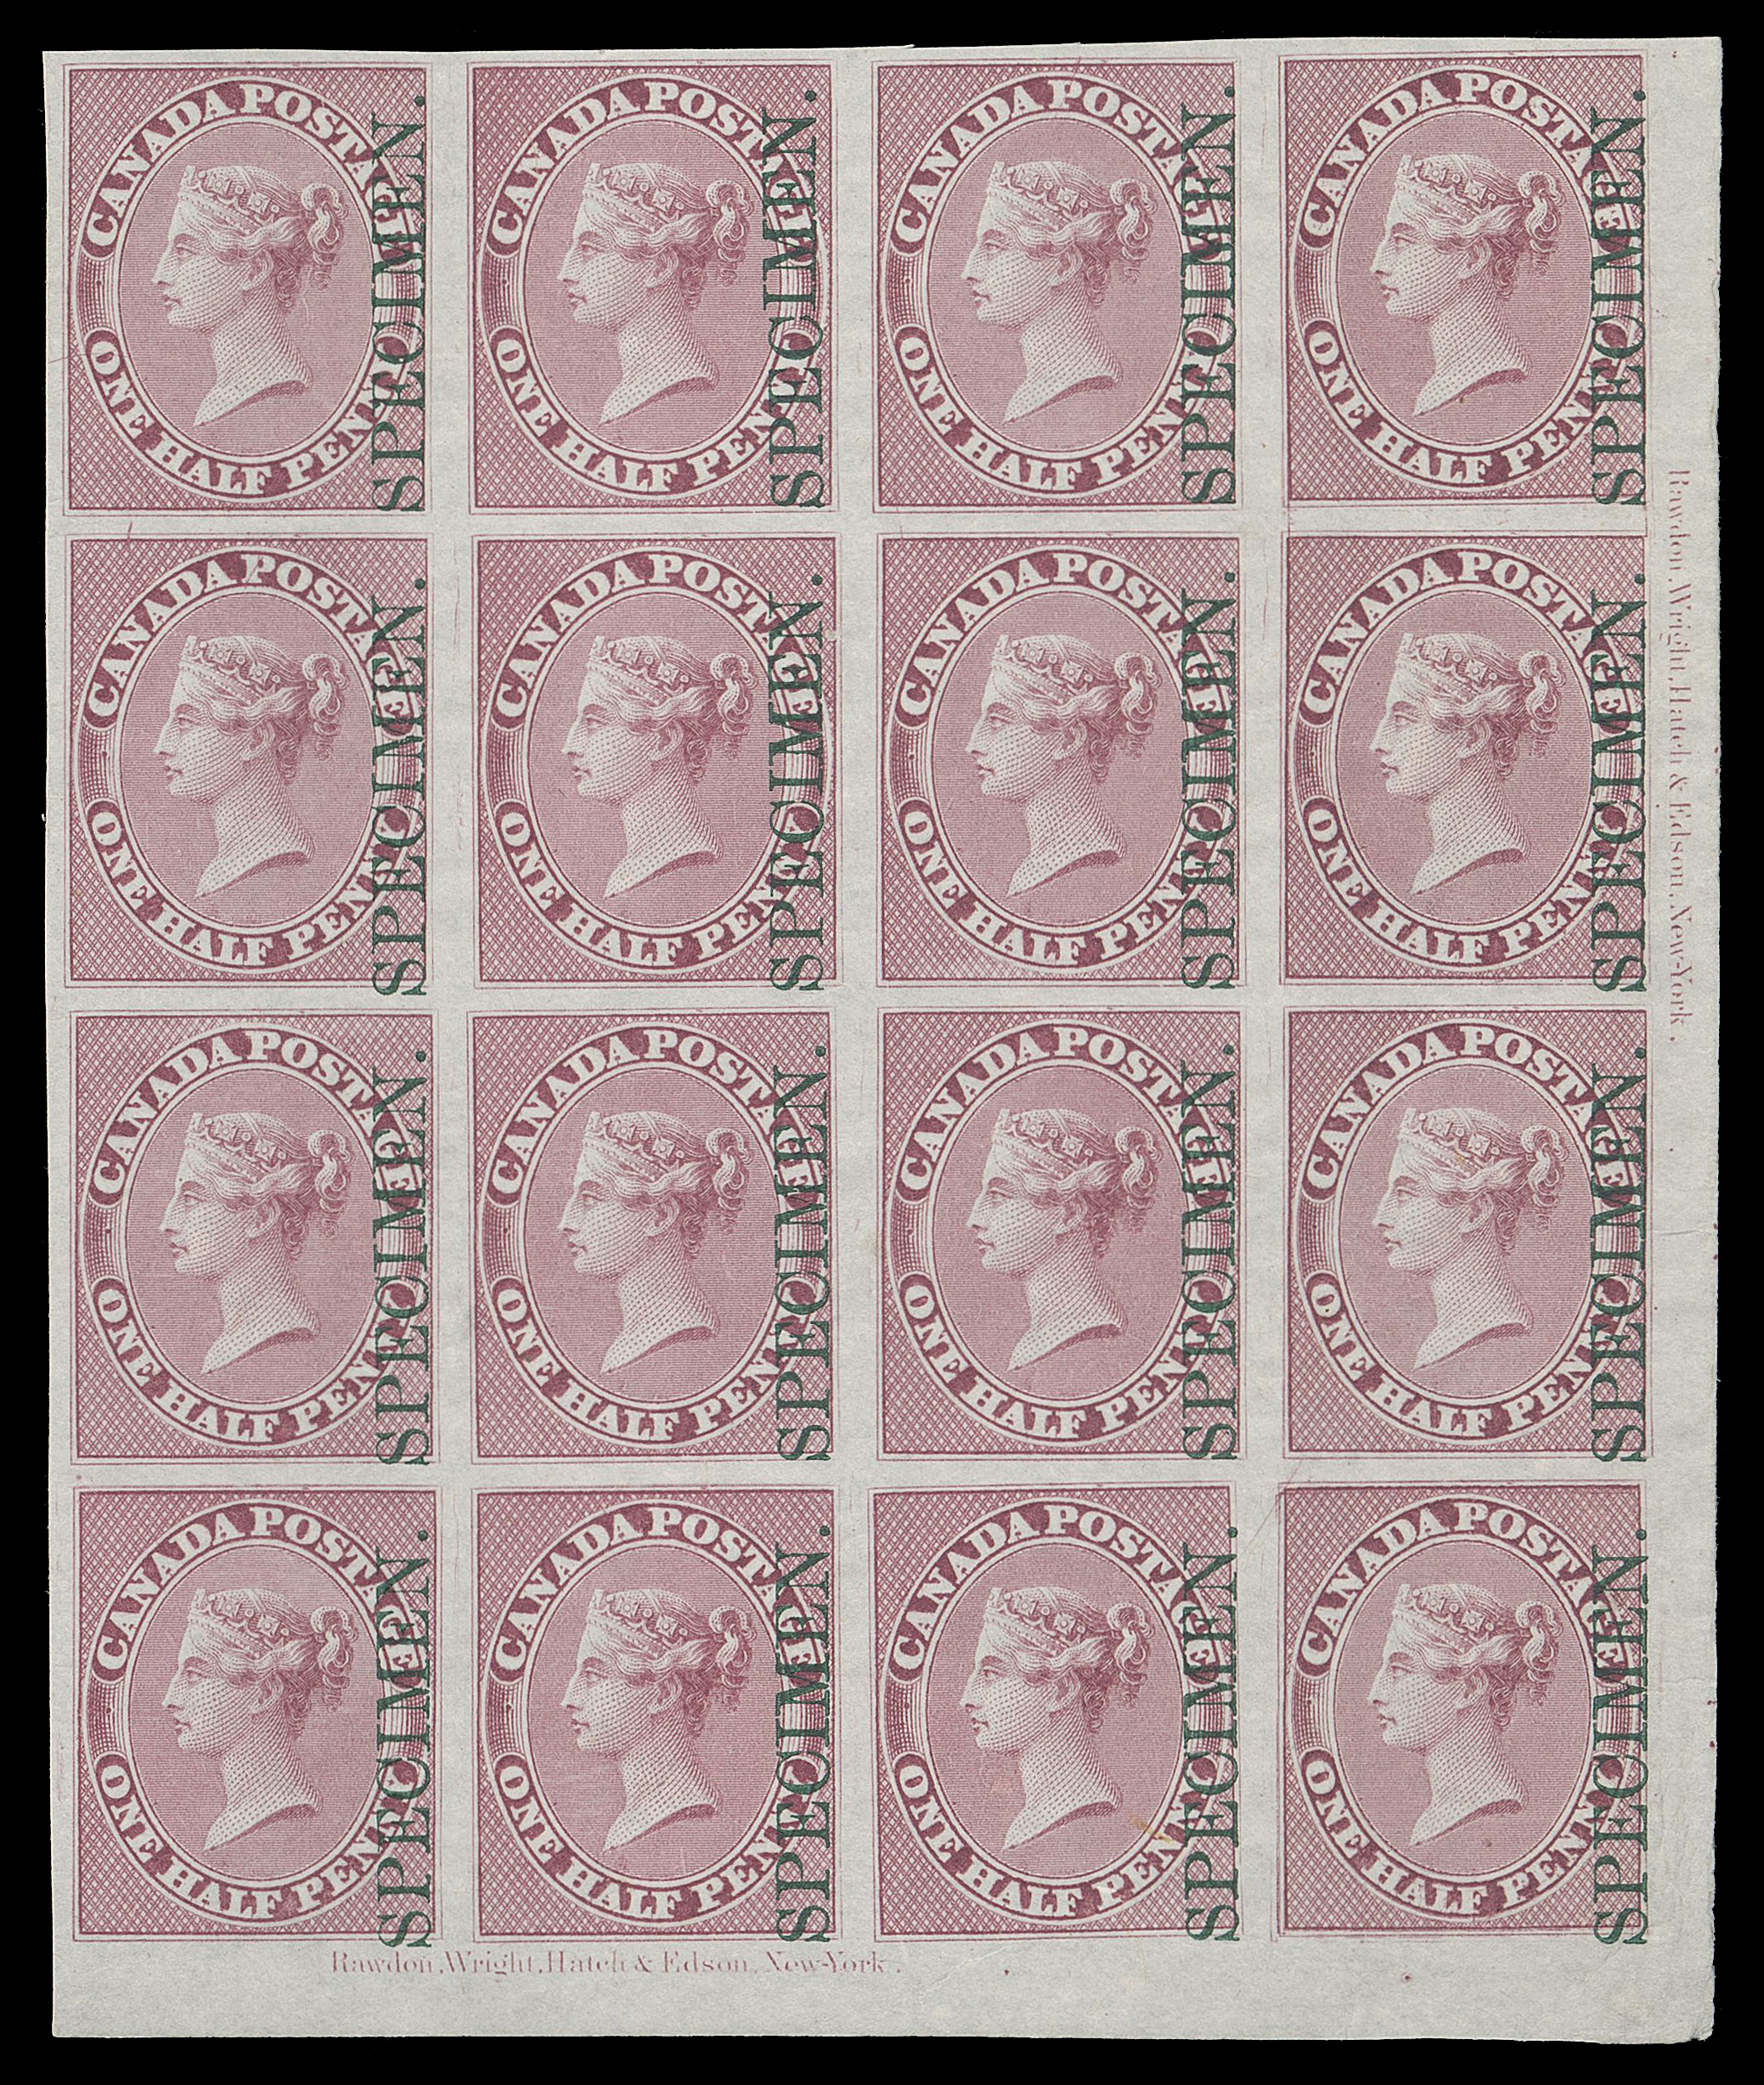 HALF PENNY AND ONE CENT  8Pi + varieties,A remarkable corner margin plate proof block of sixteen, printed in rose, issued colour, on india paper with vertical SPECIMEN overprint in green, Positions 81-84 / 117-120 from the plate of 120-subjects, displaying two complete Rawdon, Wright, Hatch & Edson, New York plate imprints, shows Major Re-entries at Positions 84, 96 and 120, VF (Unitrade cat. $4,800 as normal proofs)

Provenance: The "Lindemann" Collection (private treaty, circa. 1997)